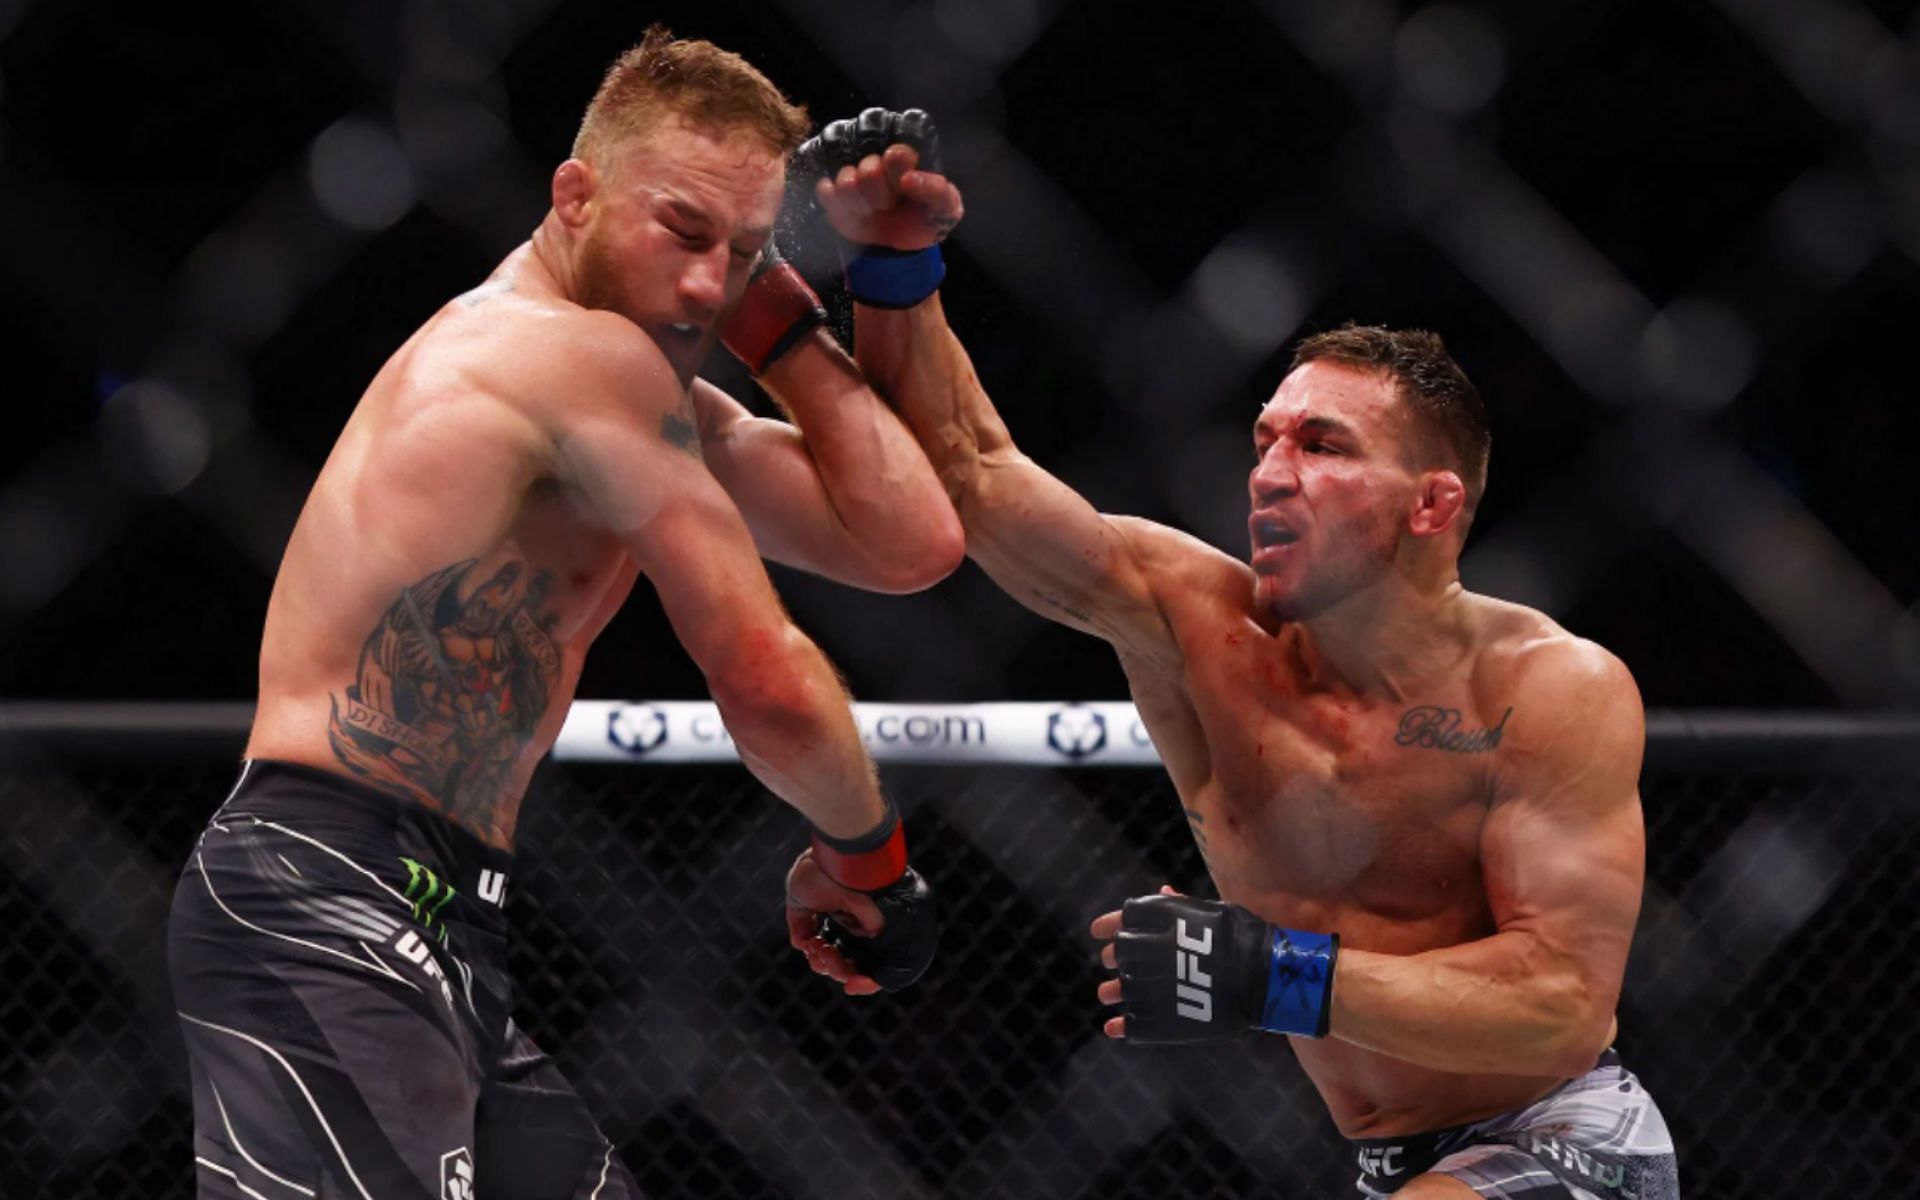 Justin Gaethje (left) and Michael Chandler (right) during their fight at UFC 268.